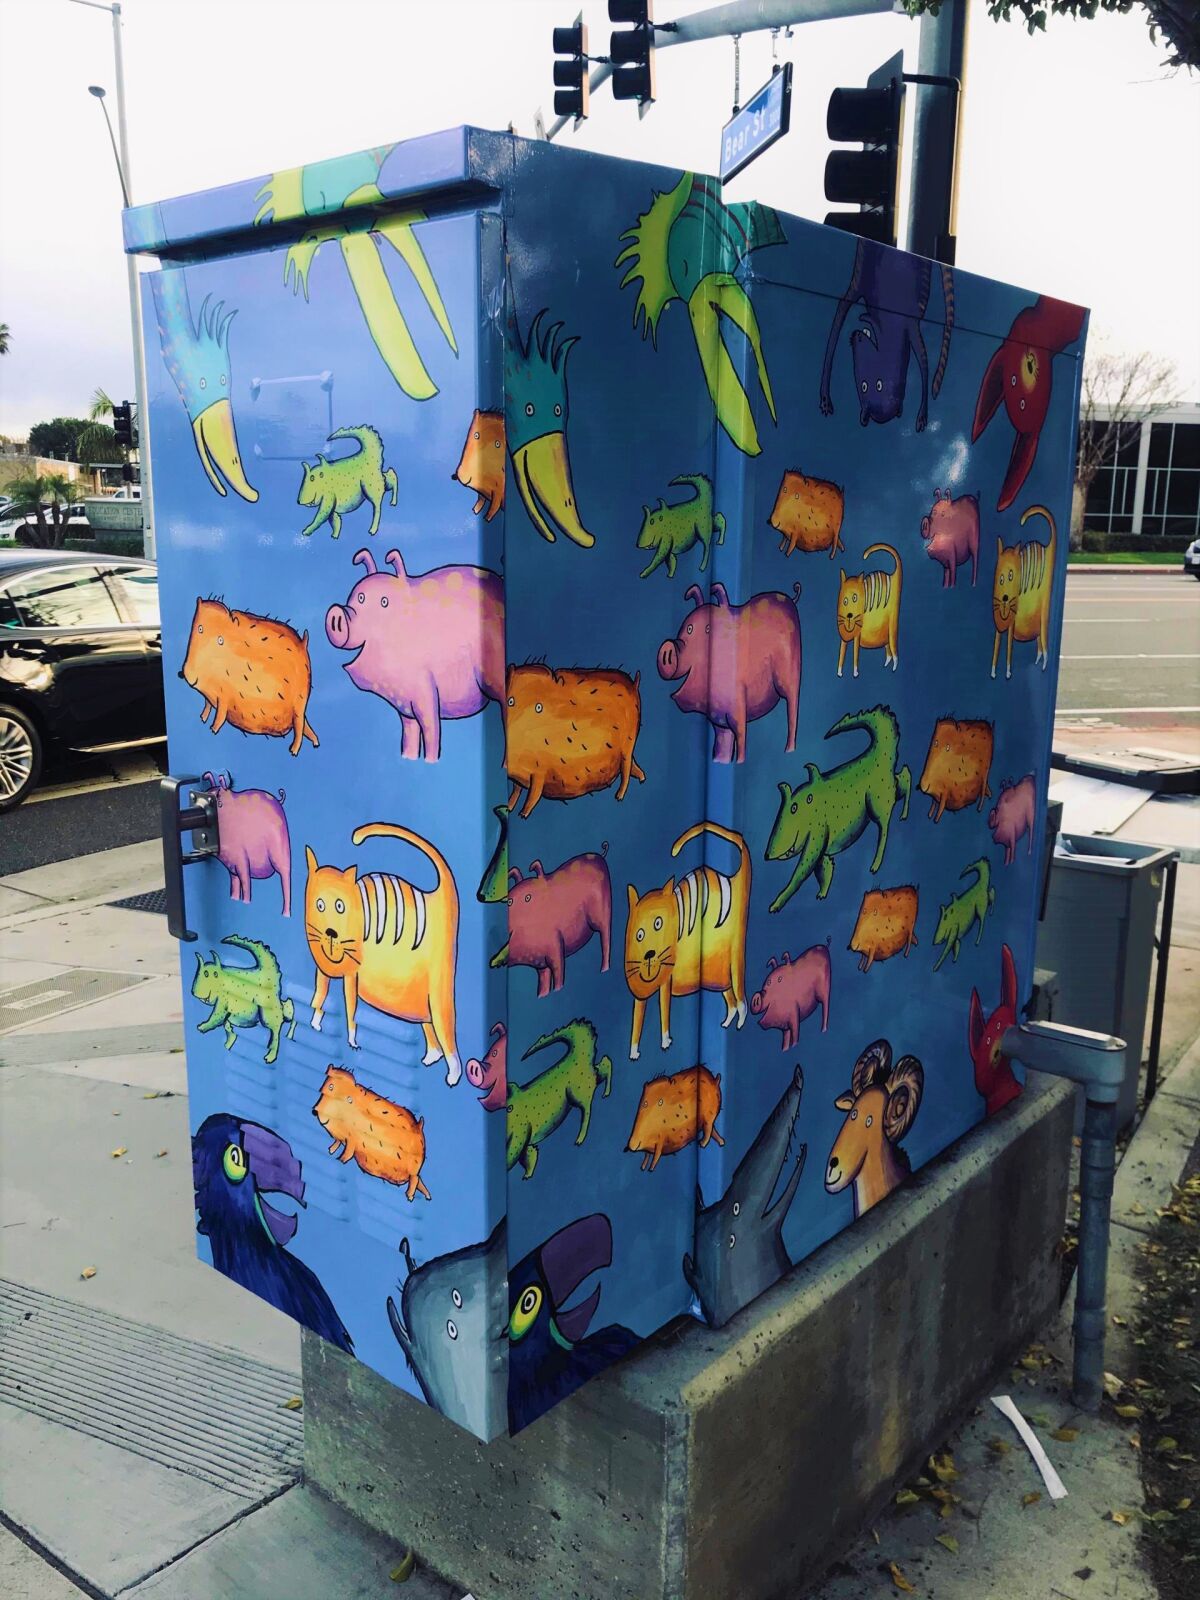 A utility box art wrap created by Bonnie Matthews in 2020 stands at the corner of Bear and Bristol streets in Costa Mesa.